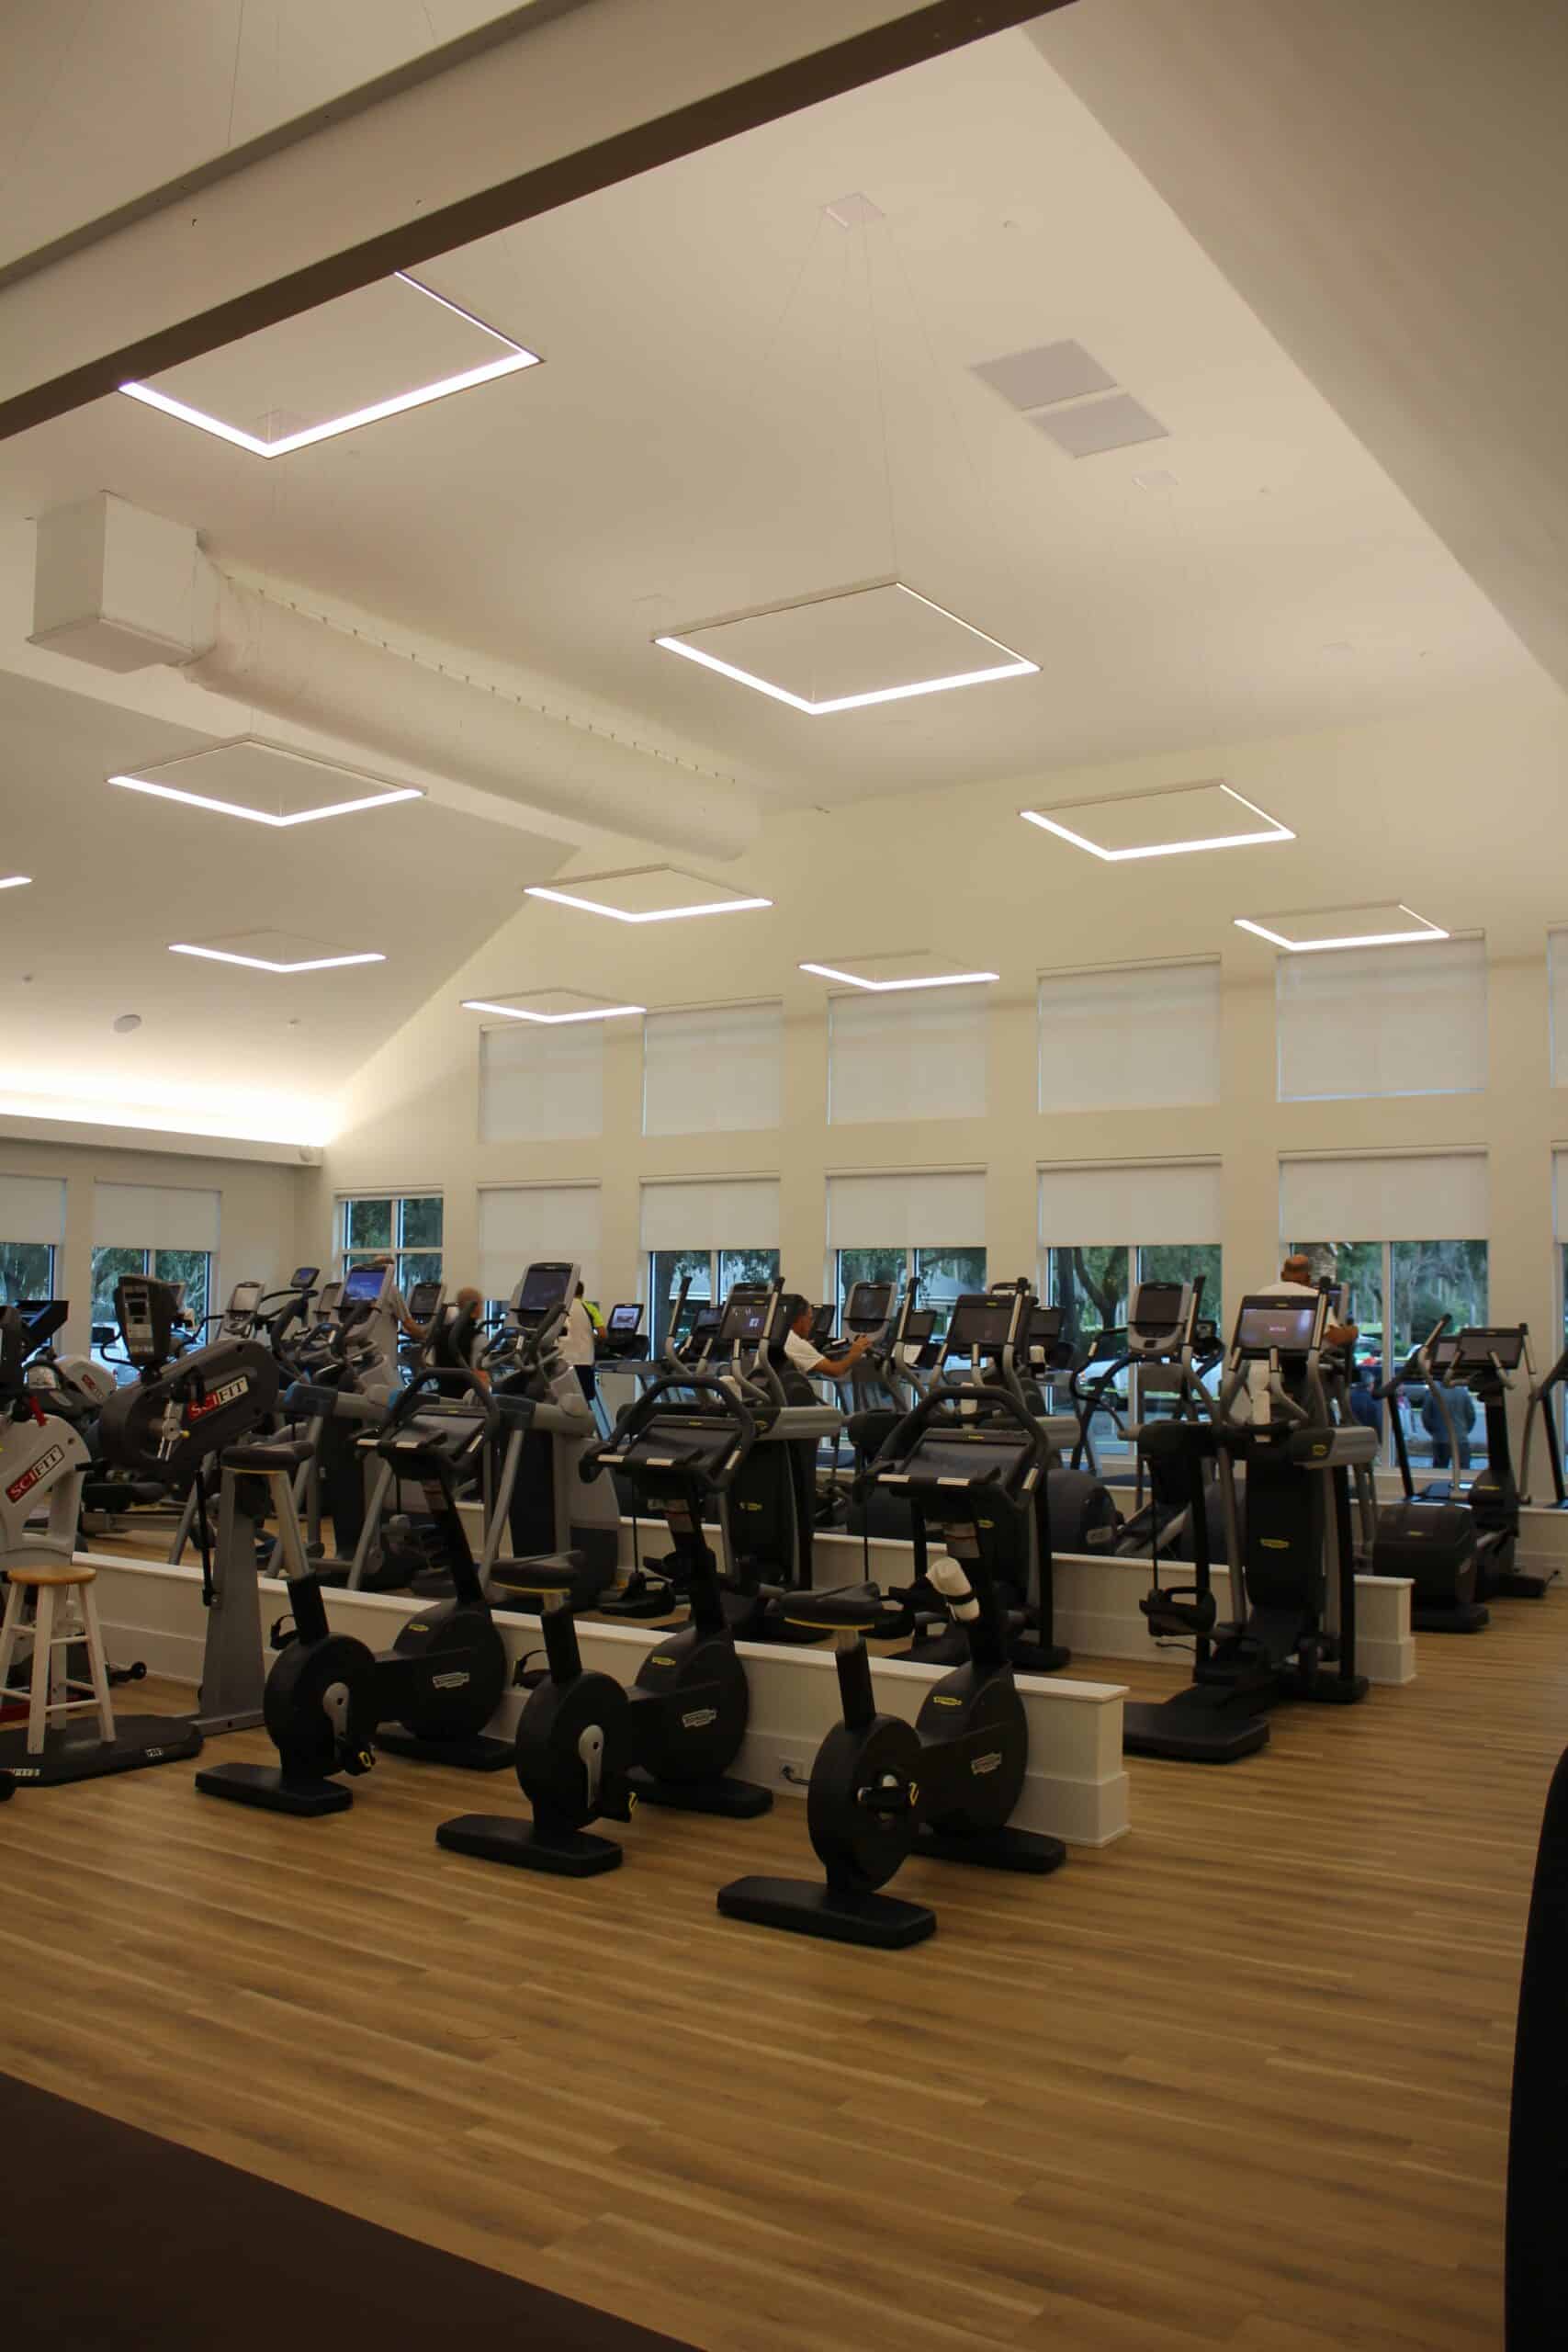 Rows of various cardio fitness equipment at the newly renovated Oakridge Wellness Center.